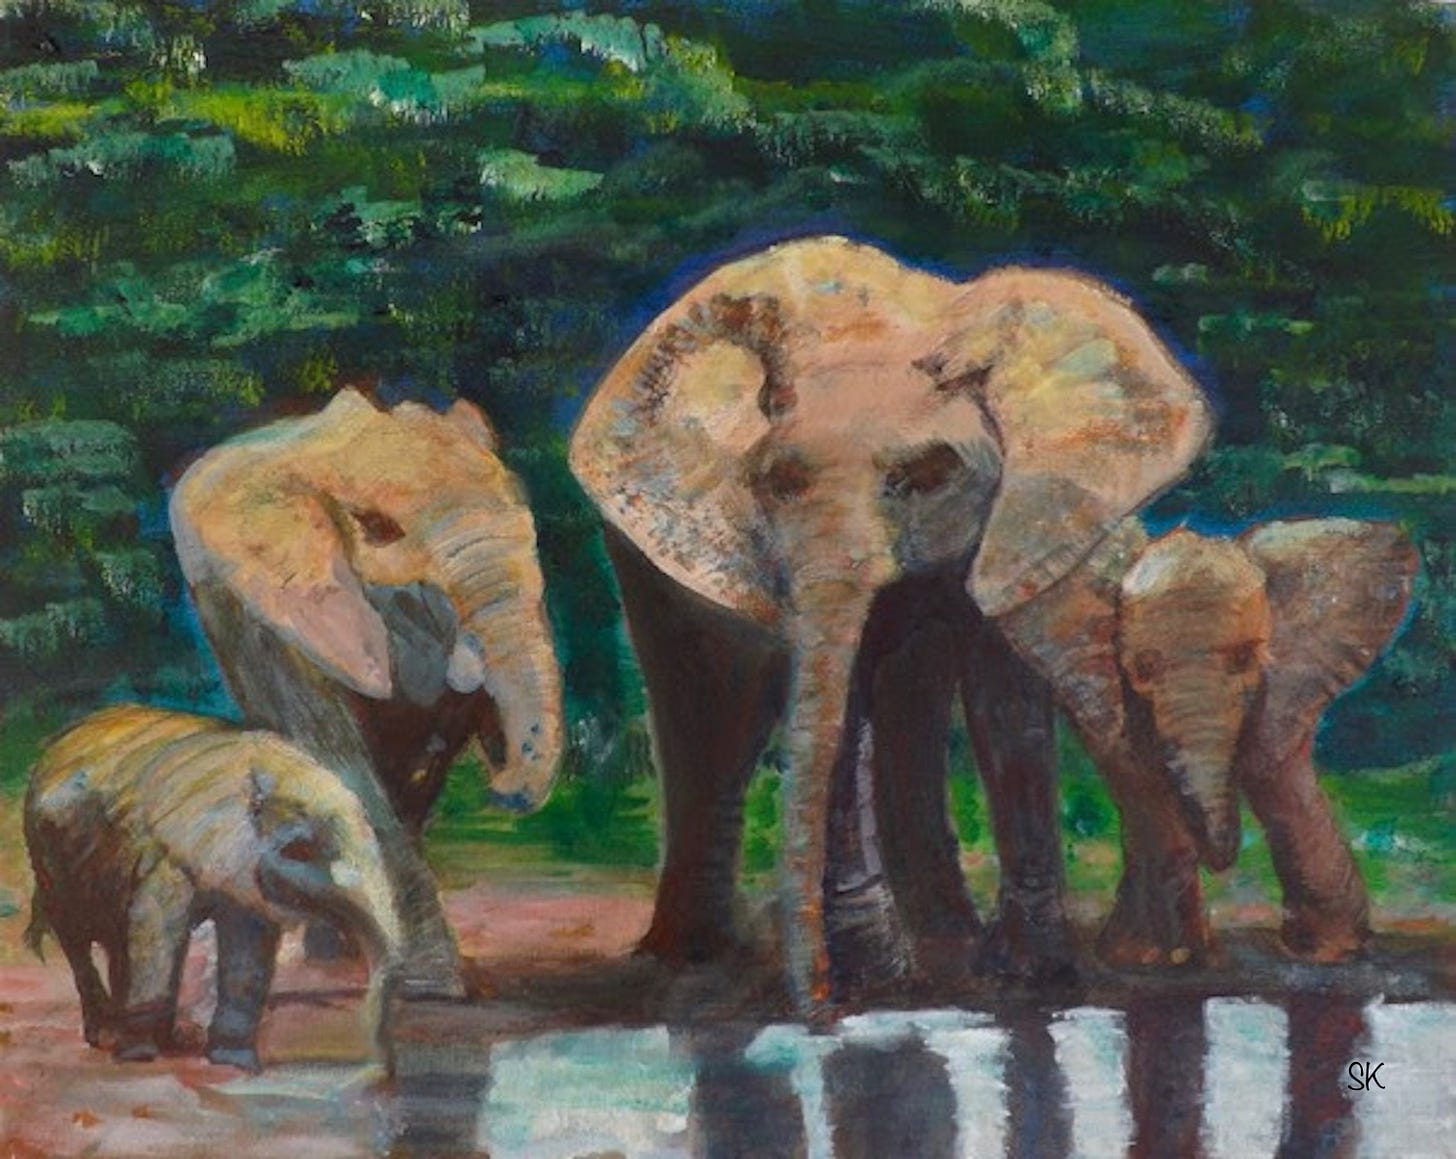 Acrylic painting by Sherry Killam Arts of a Mother and three young elephants at a waterfall against a dark green forest.